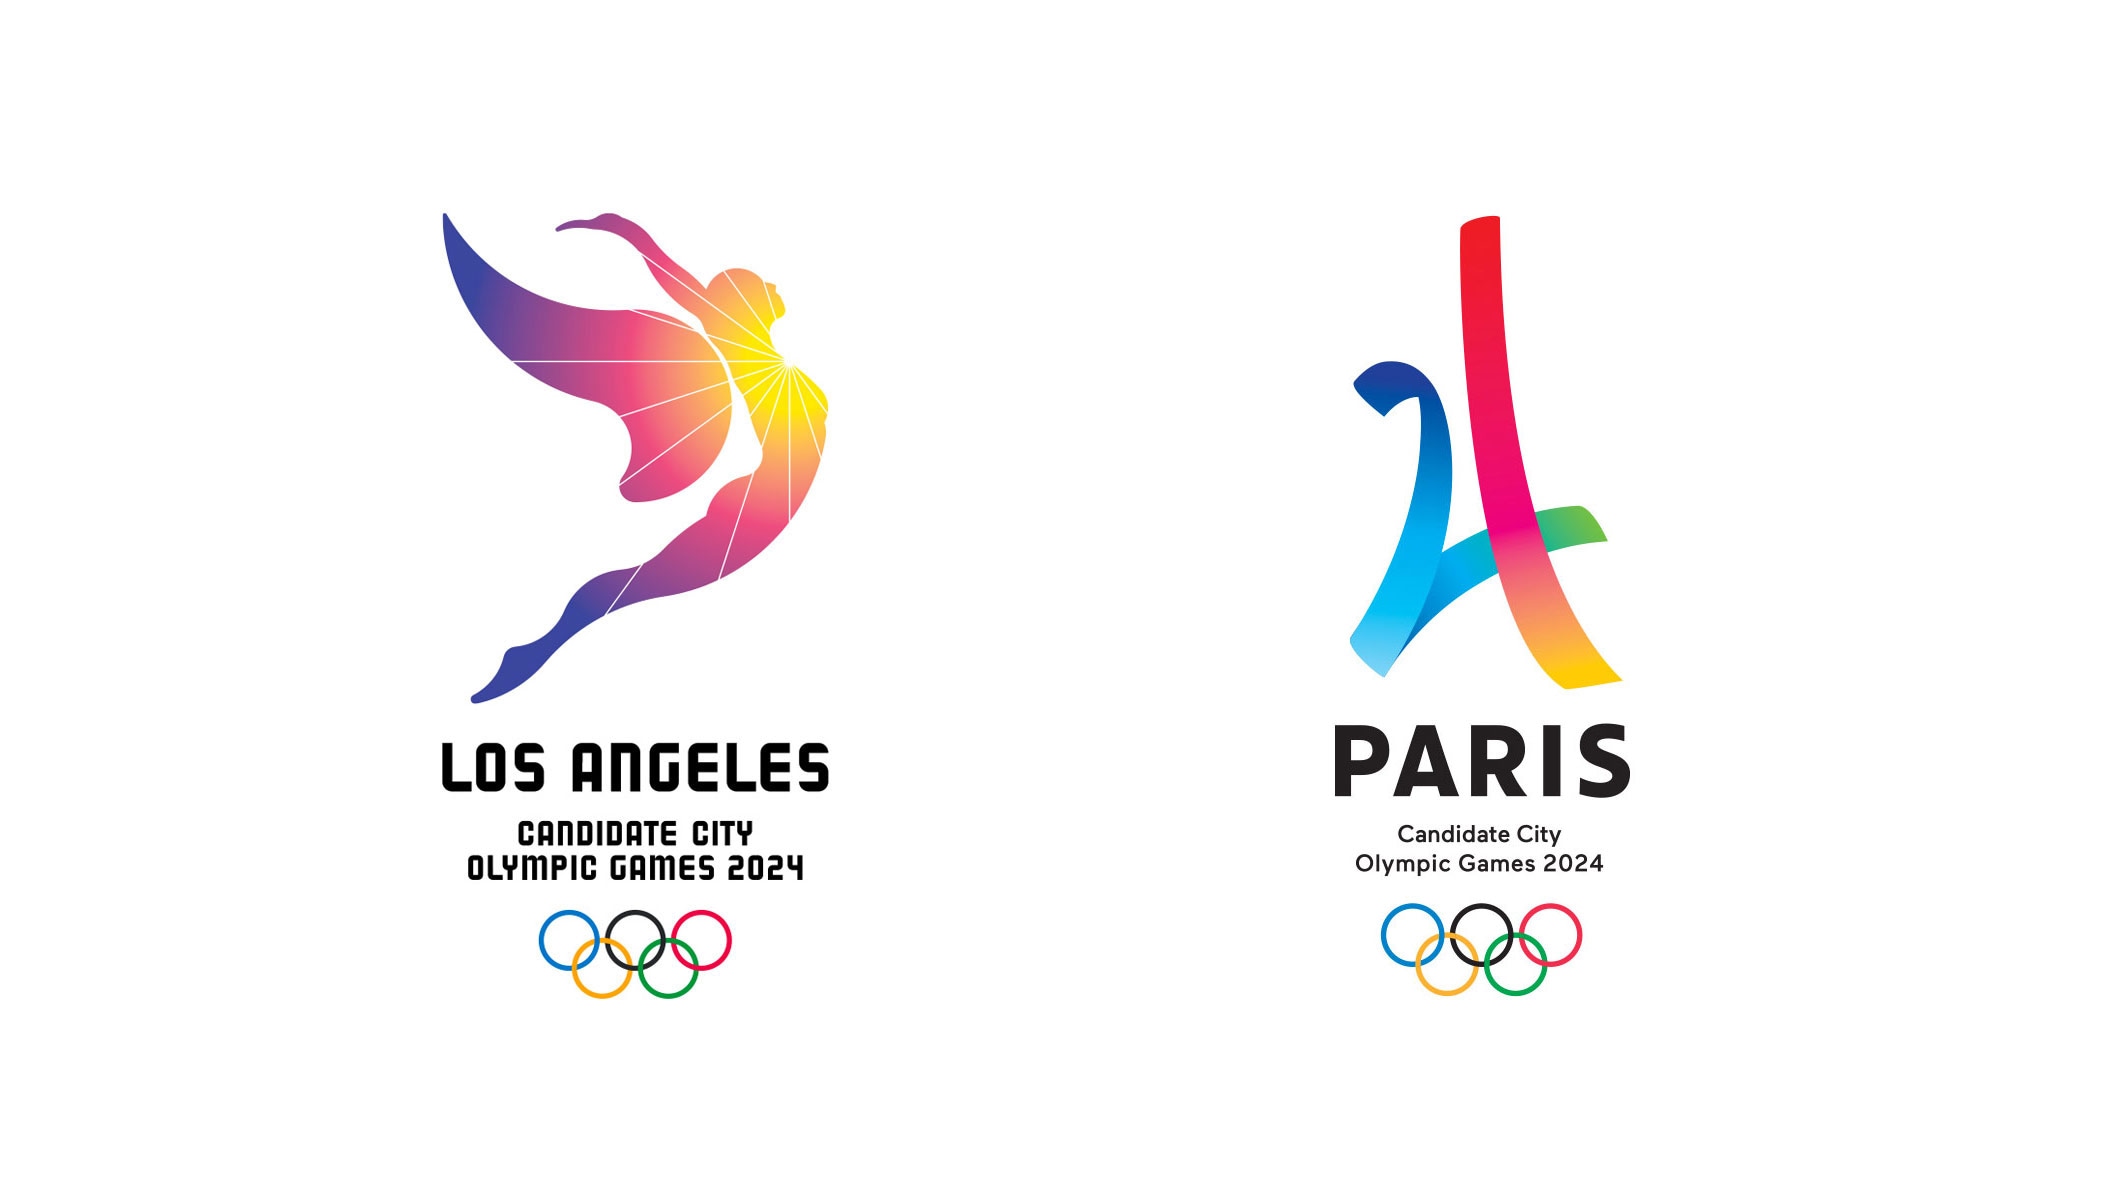 Awarding the Olympic Games 2024 and 2028 is a golden opportunity - Olympic News